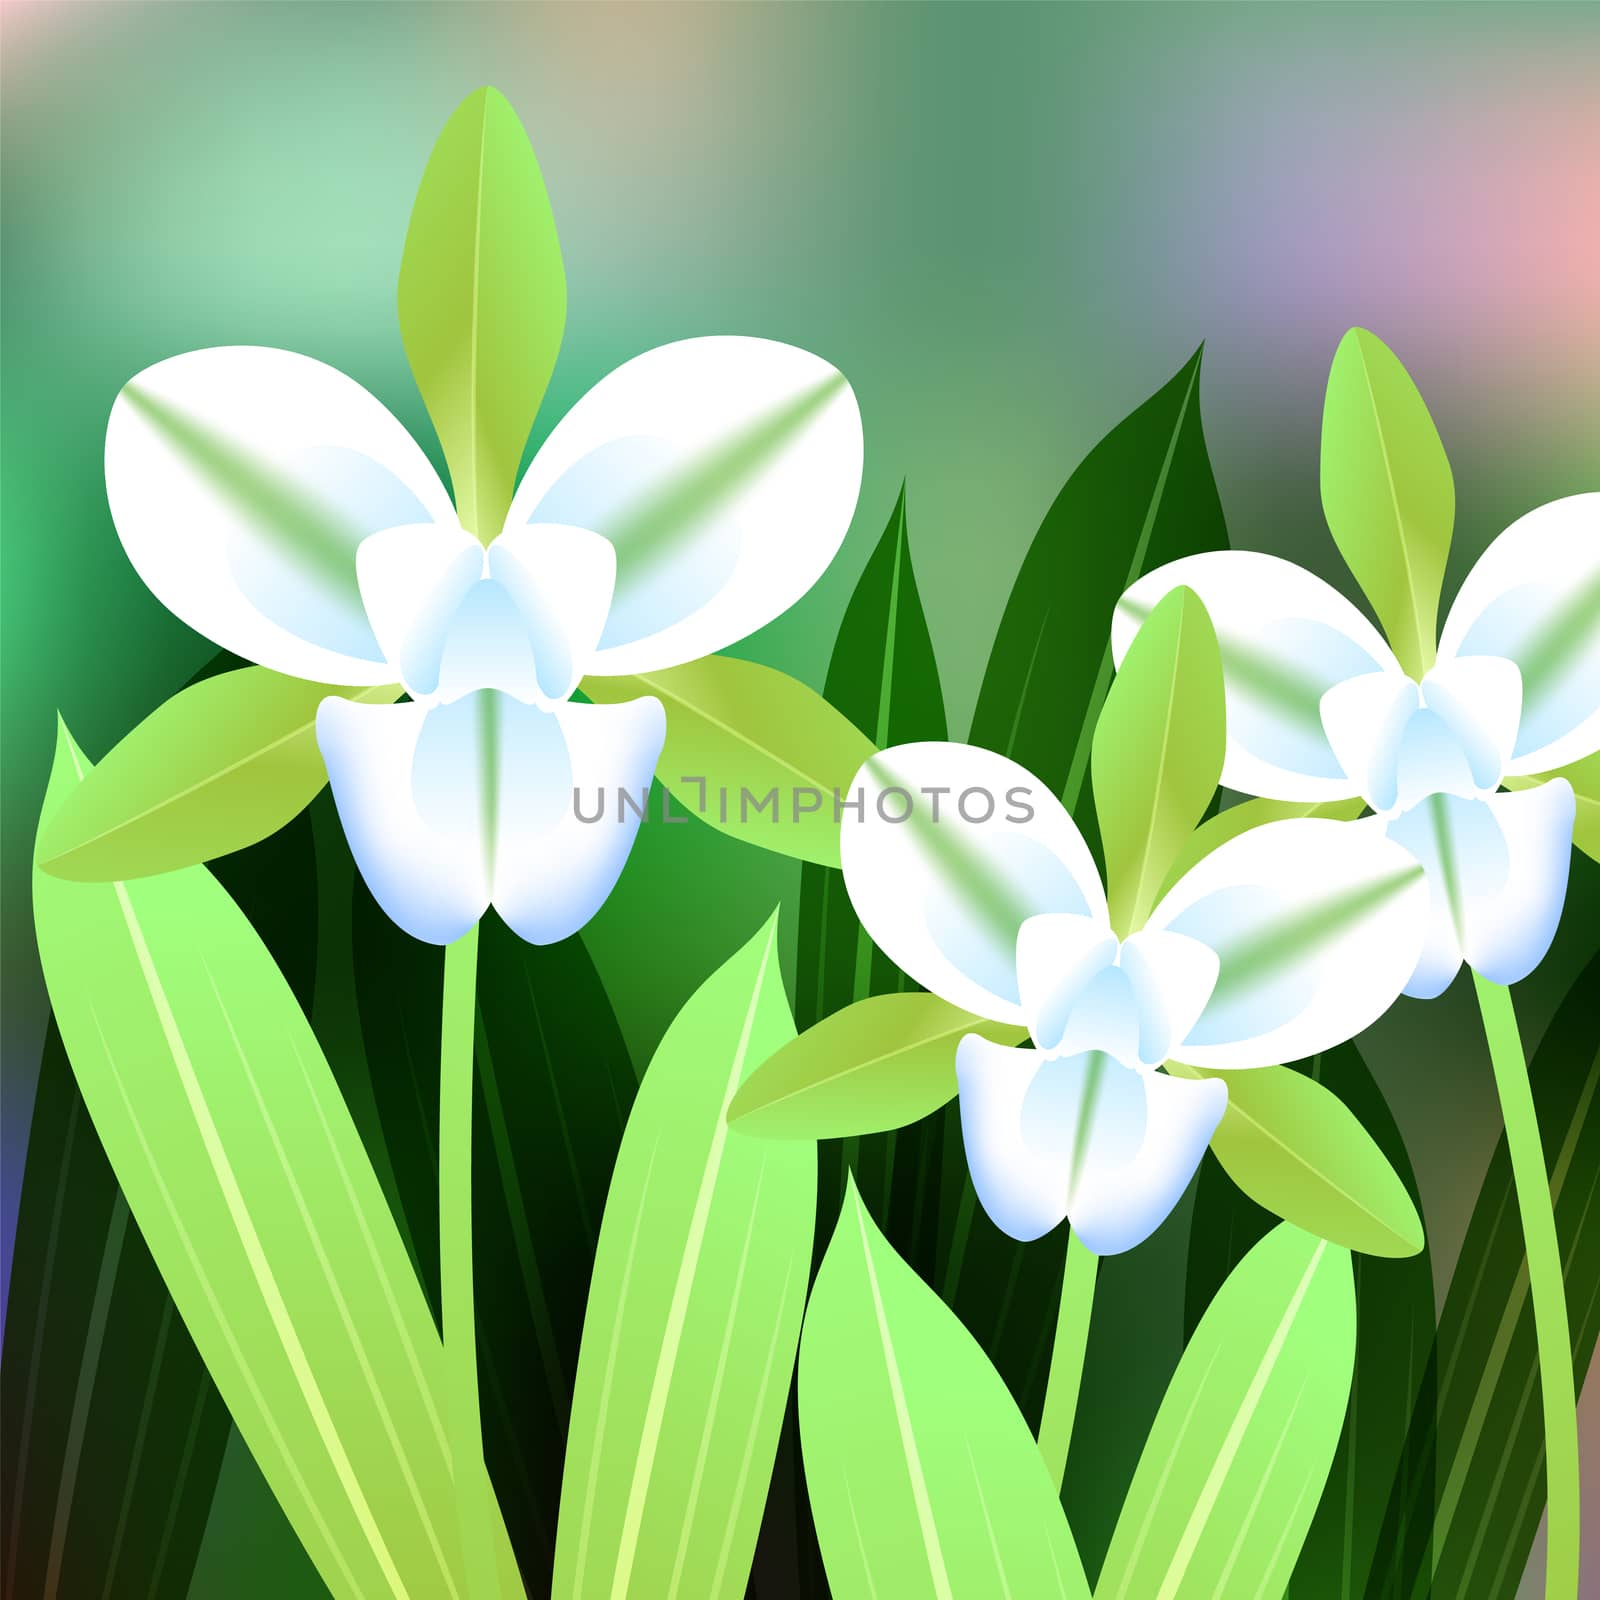 Beautiful Flower, Illustration of Lycaste orchid with Green Leaves on Tree Branch. by Adamchuk